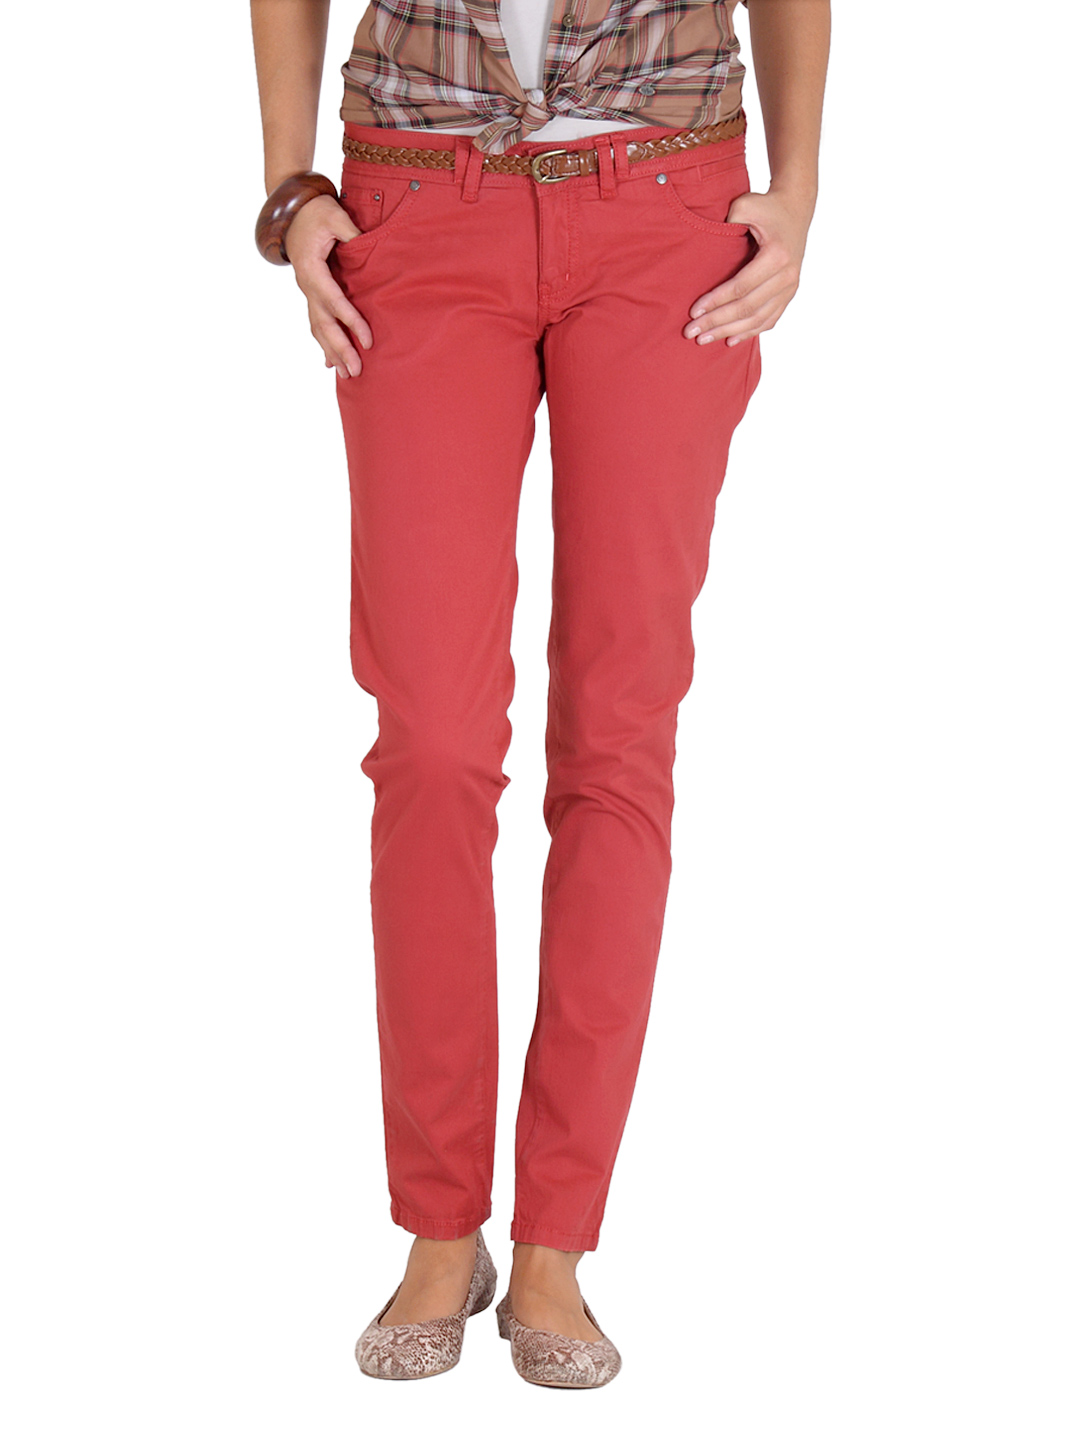 Red Trousers Women